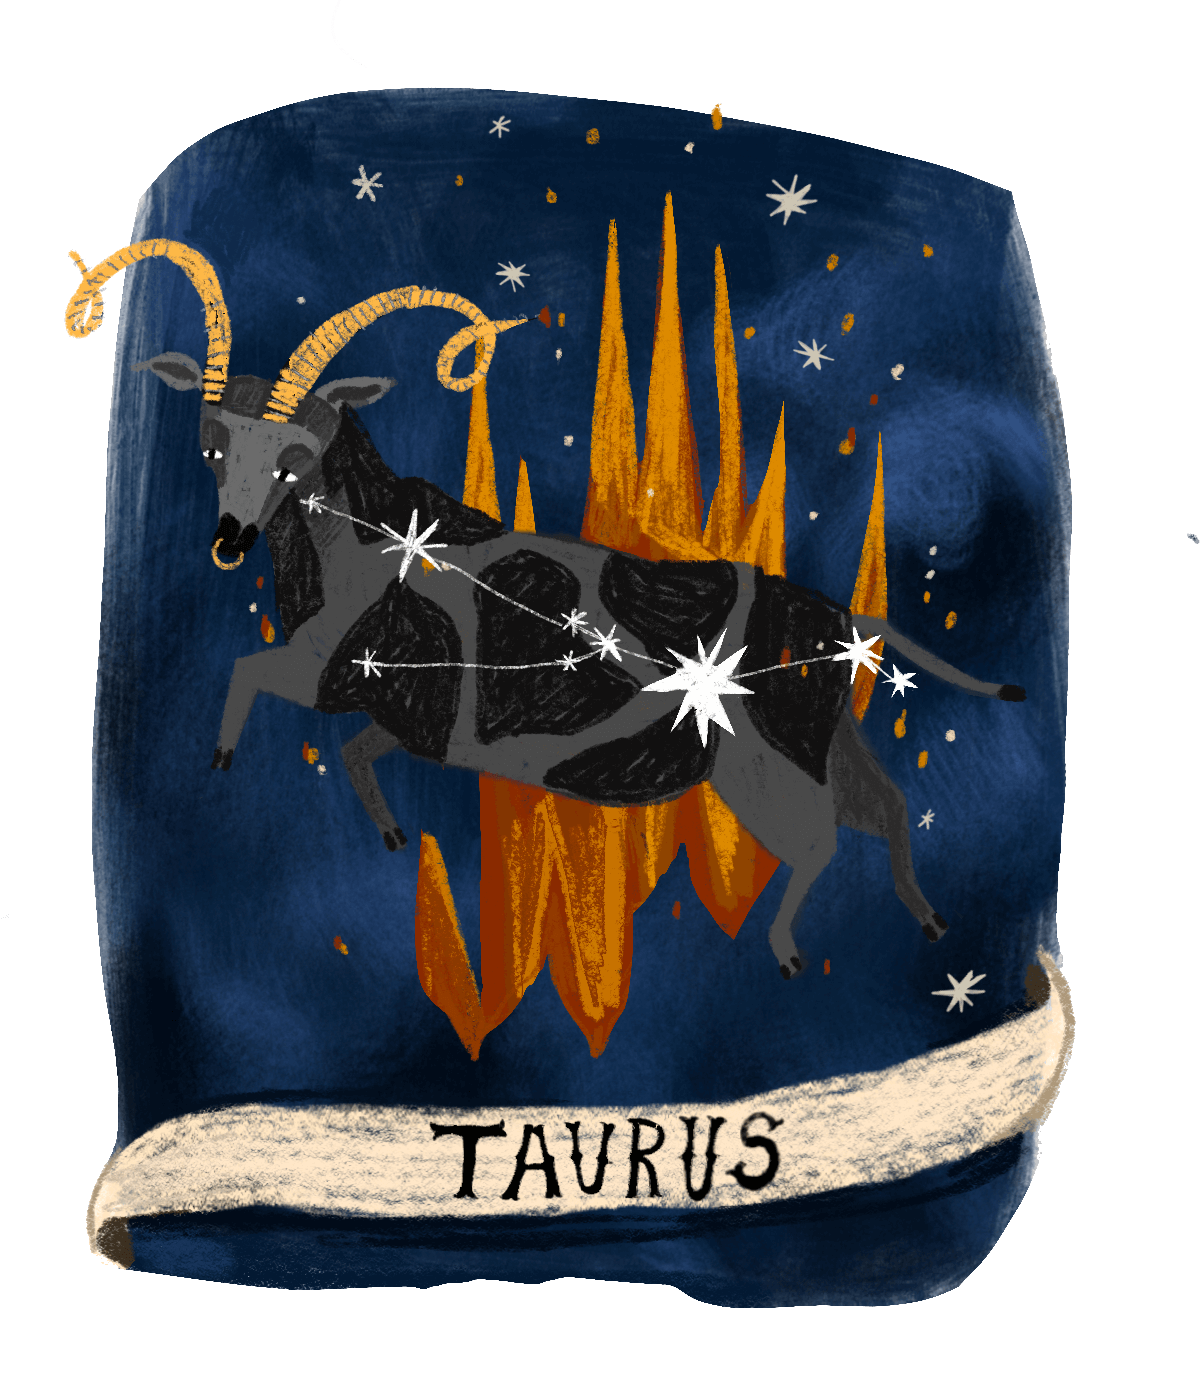 An illustration of the Taurus star sign.